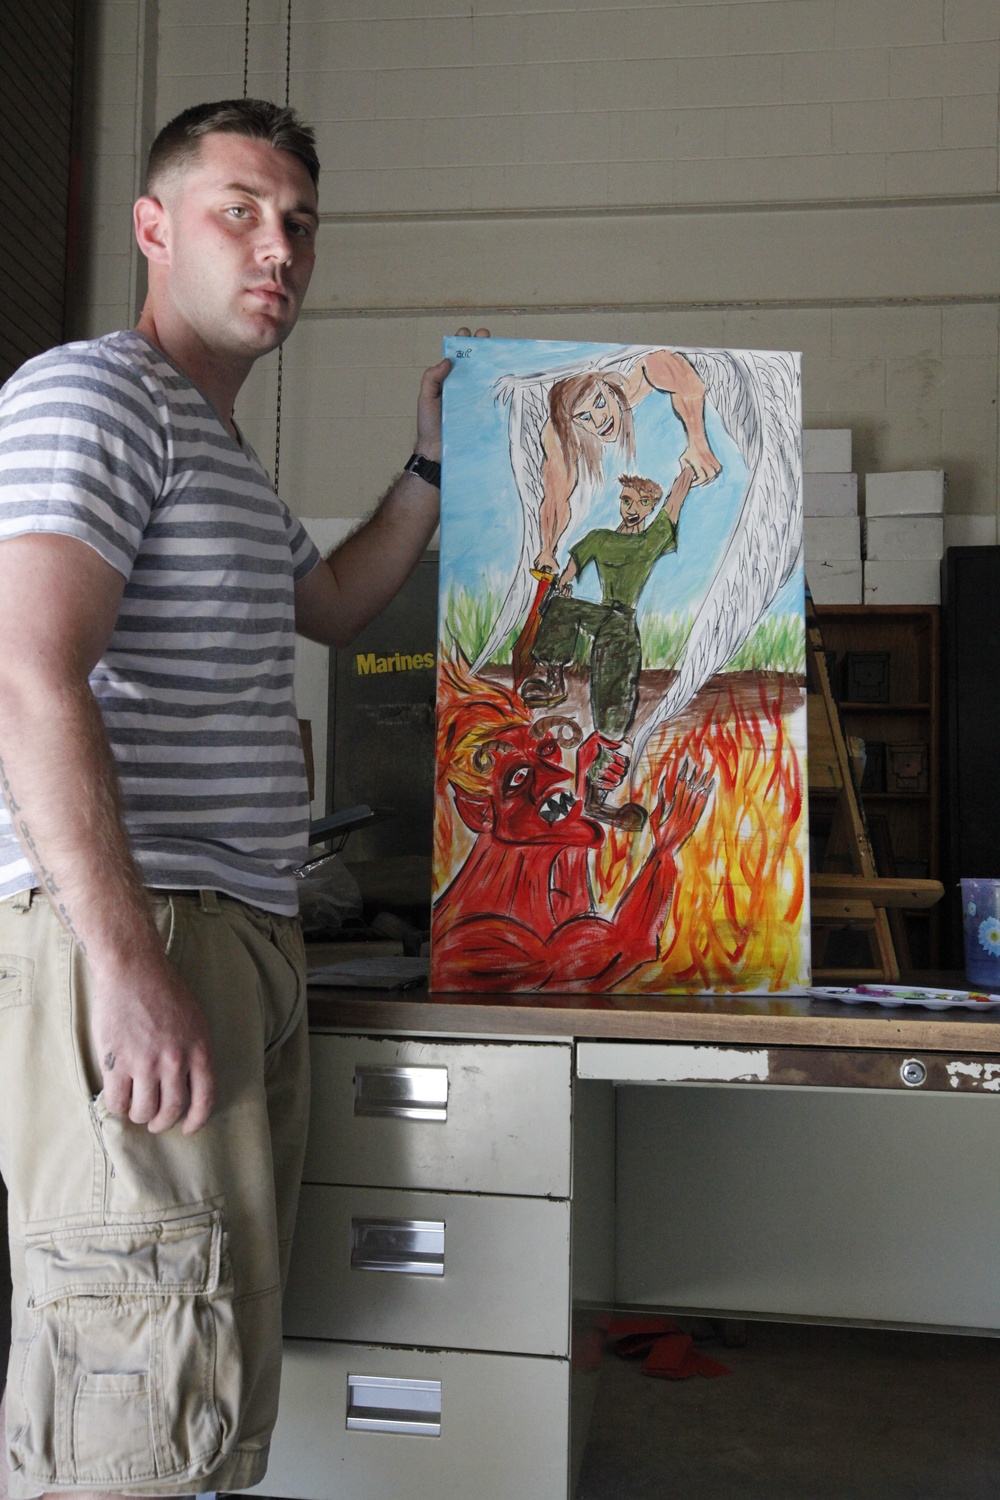 Sergeant therapeutically paints through PTSD healing process